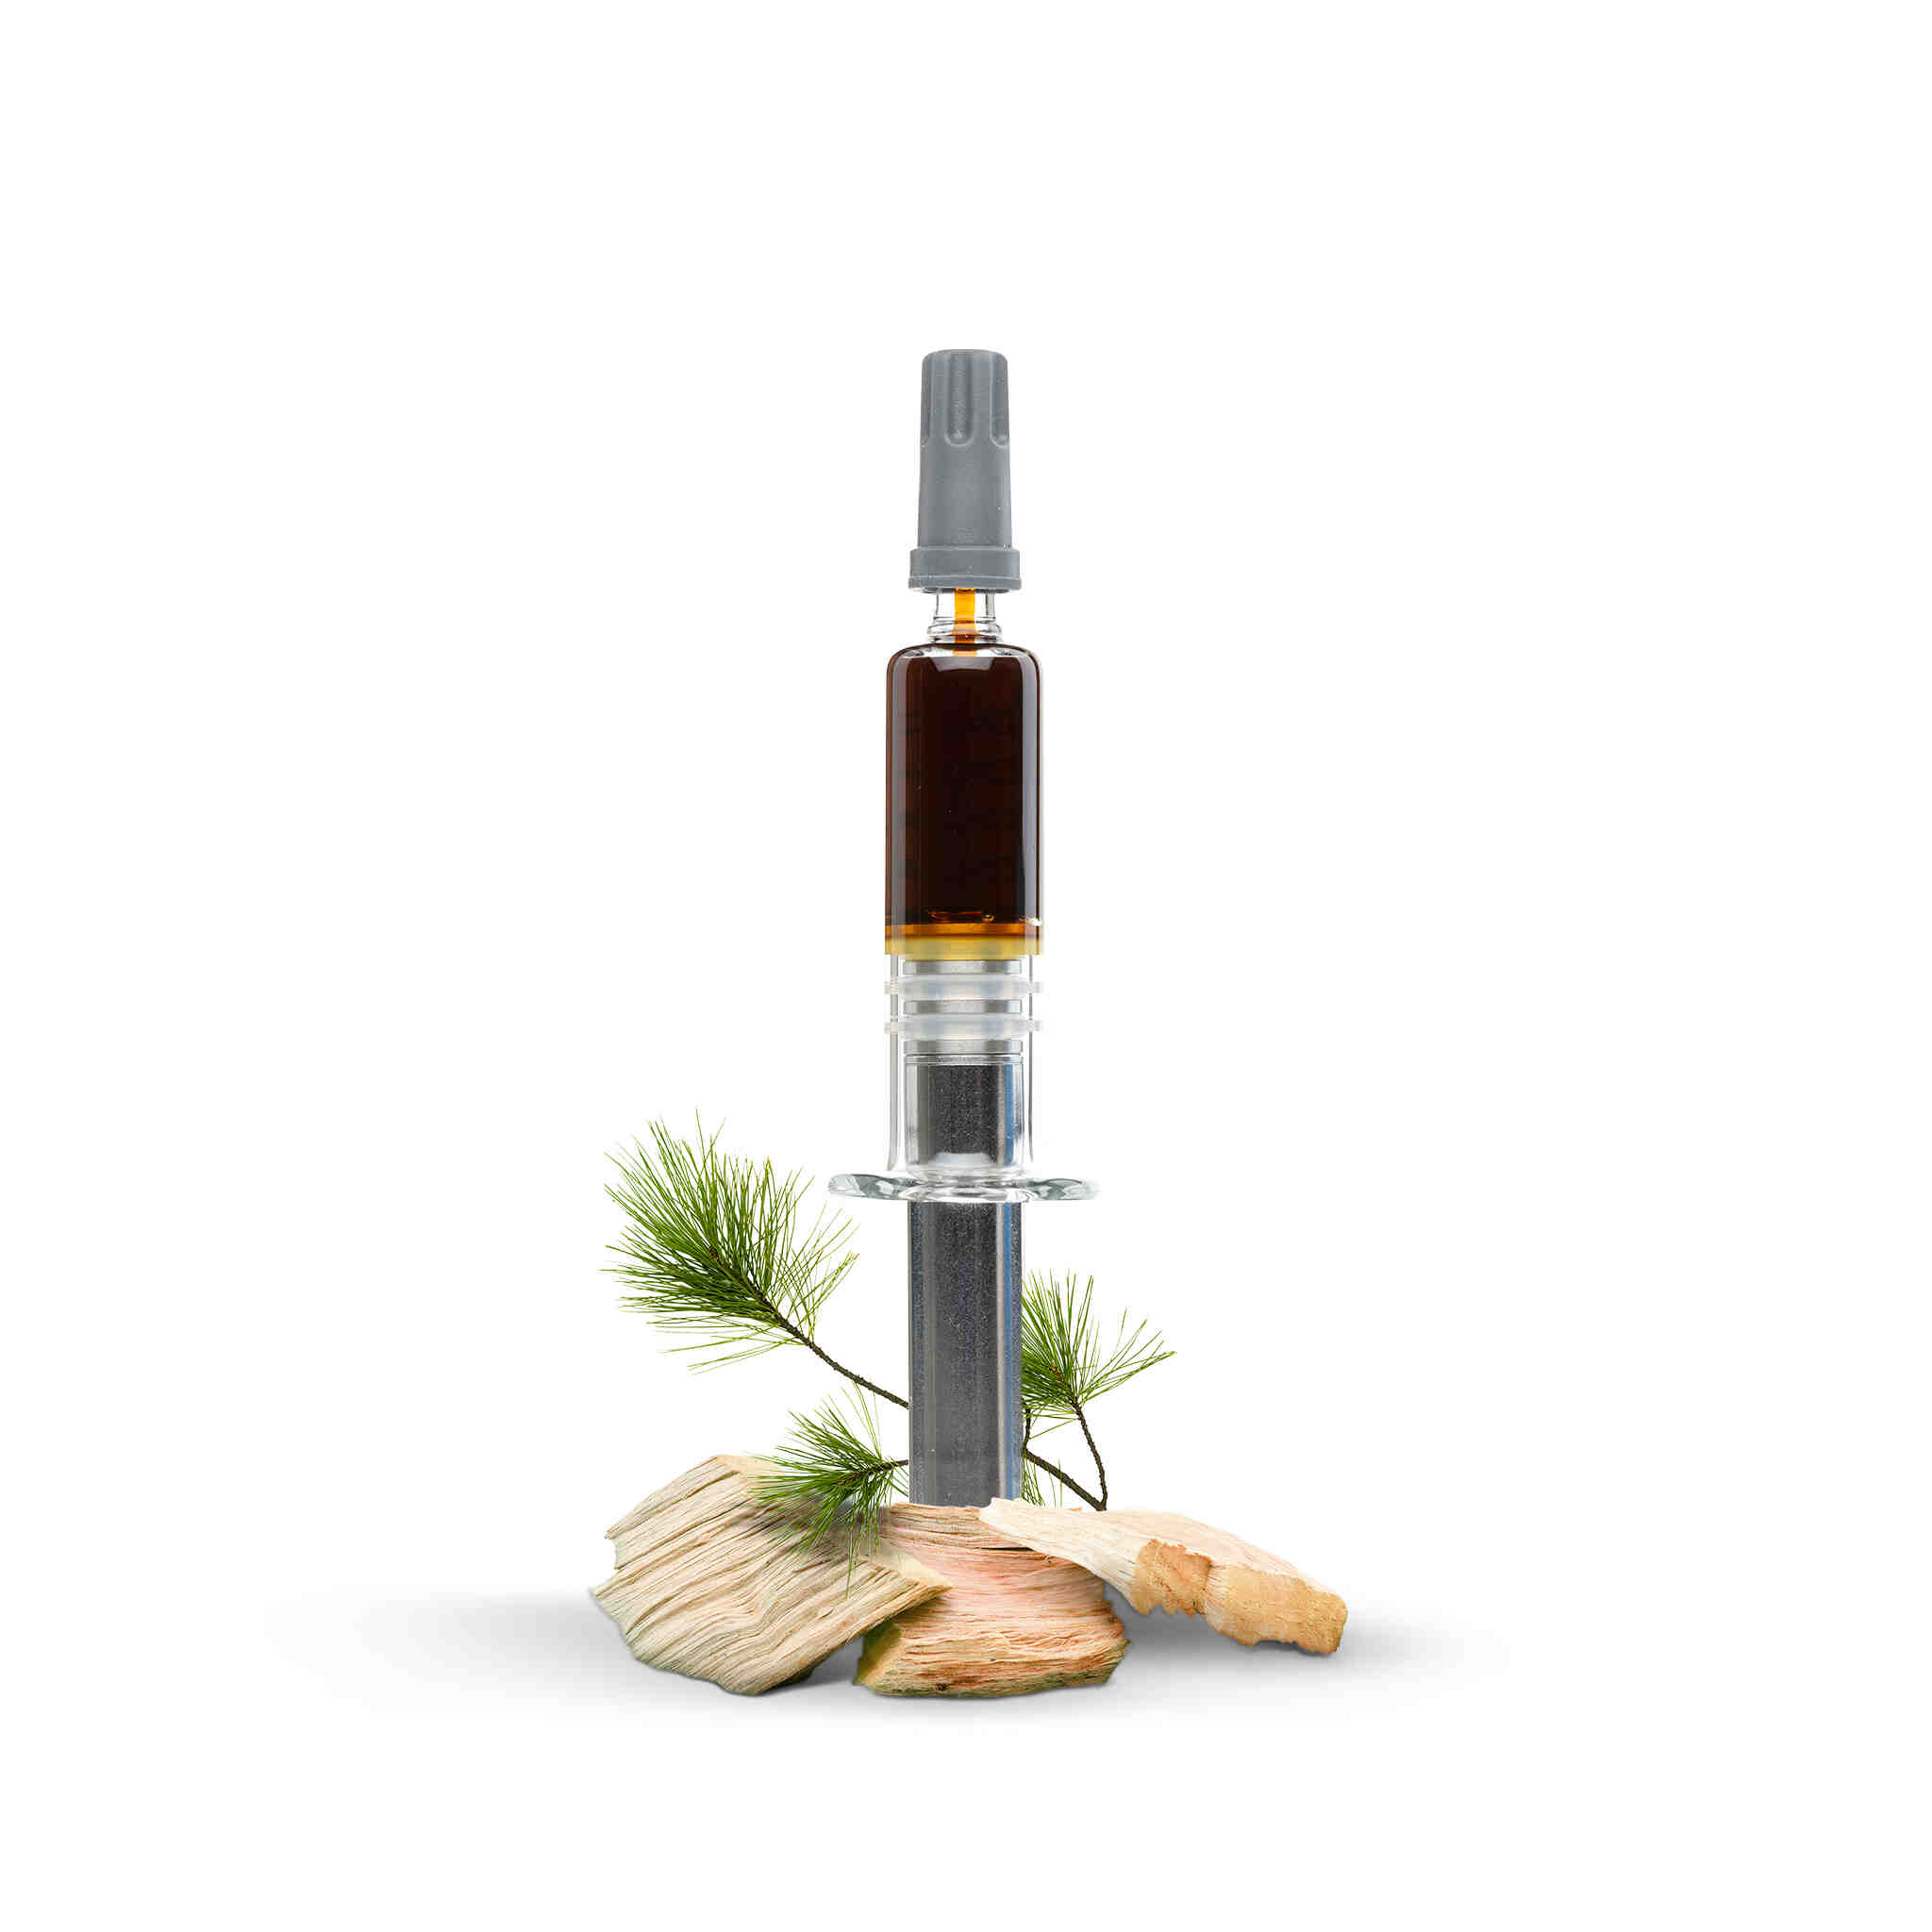 Is Holland and Barrett CBD oil strong enough?